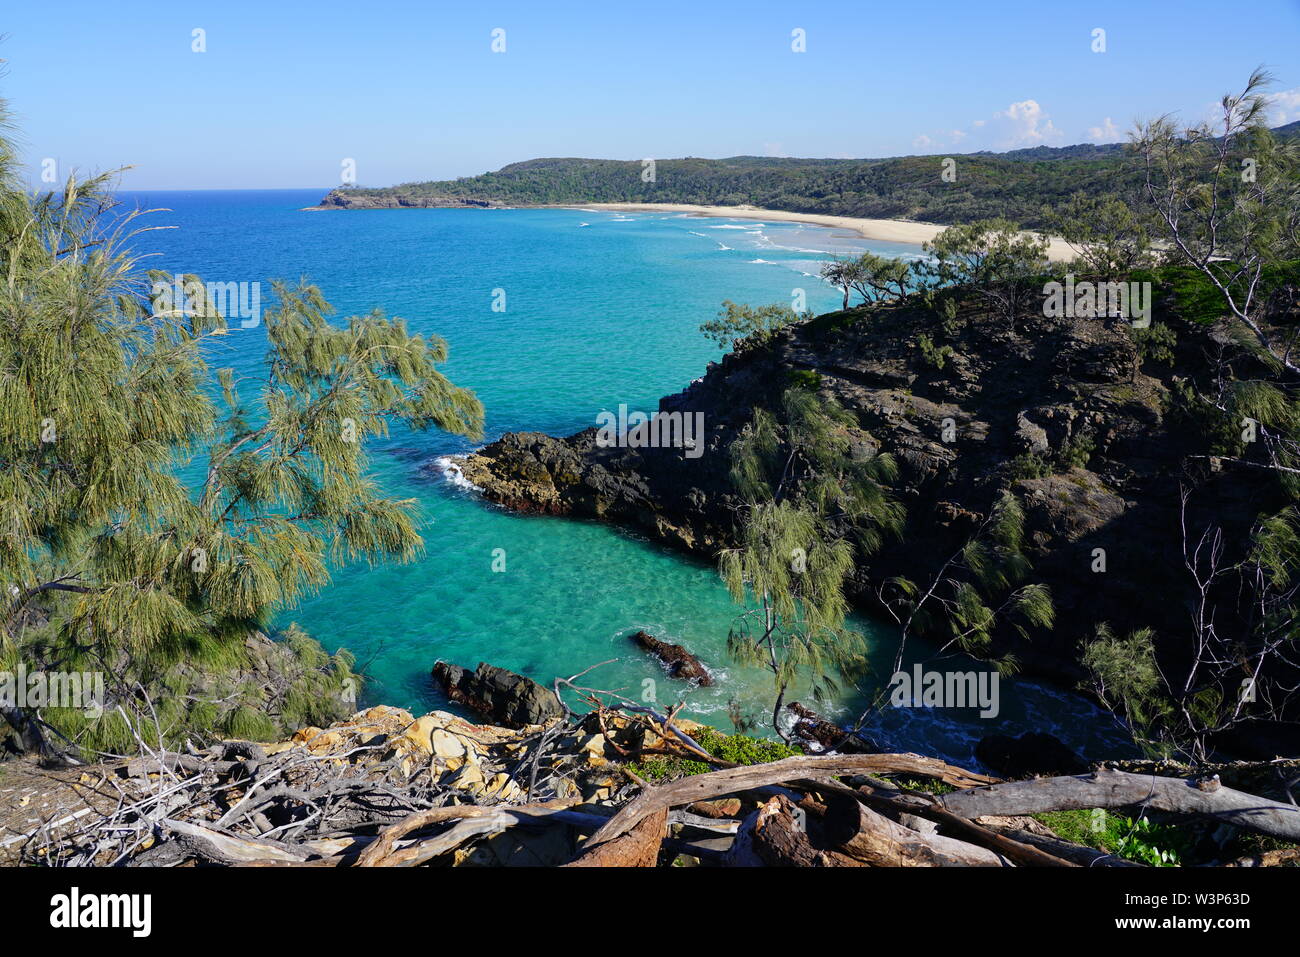 View of Dolphin Point in the Noosa National Park in Noosa, Sunshine Coast, Queensland, Australia Stock Photo